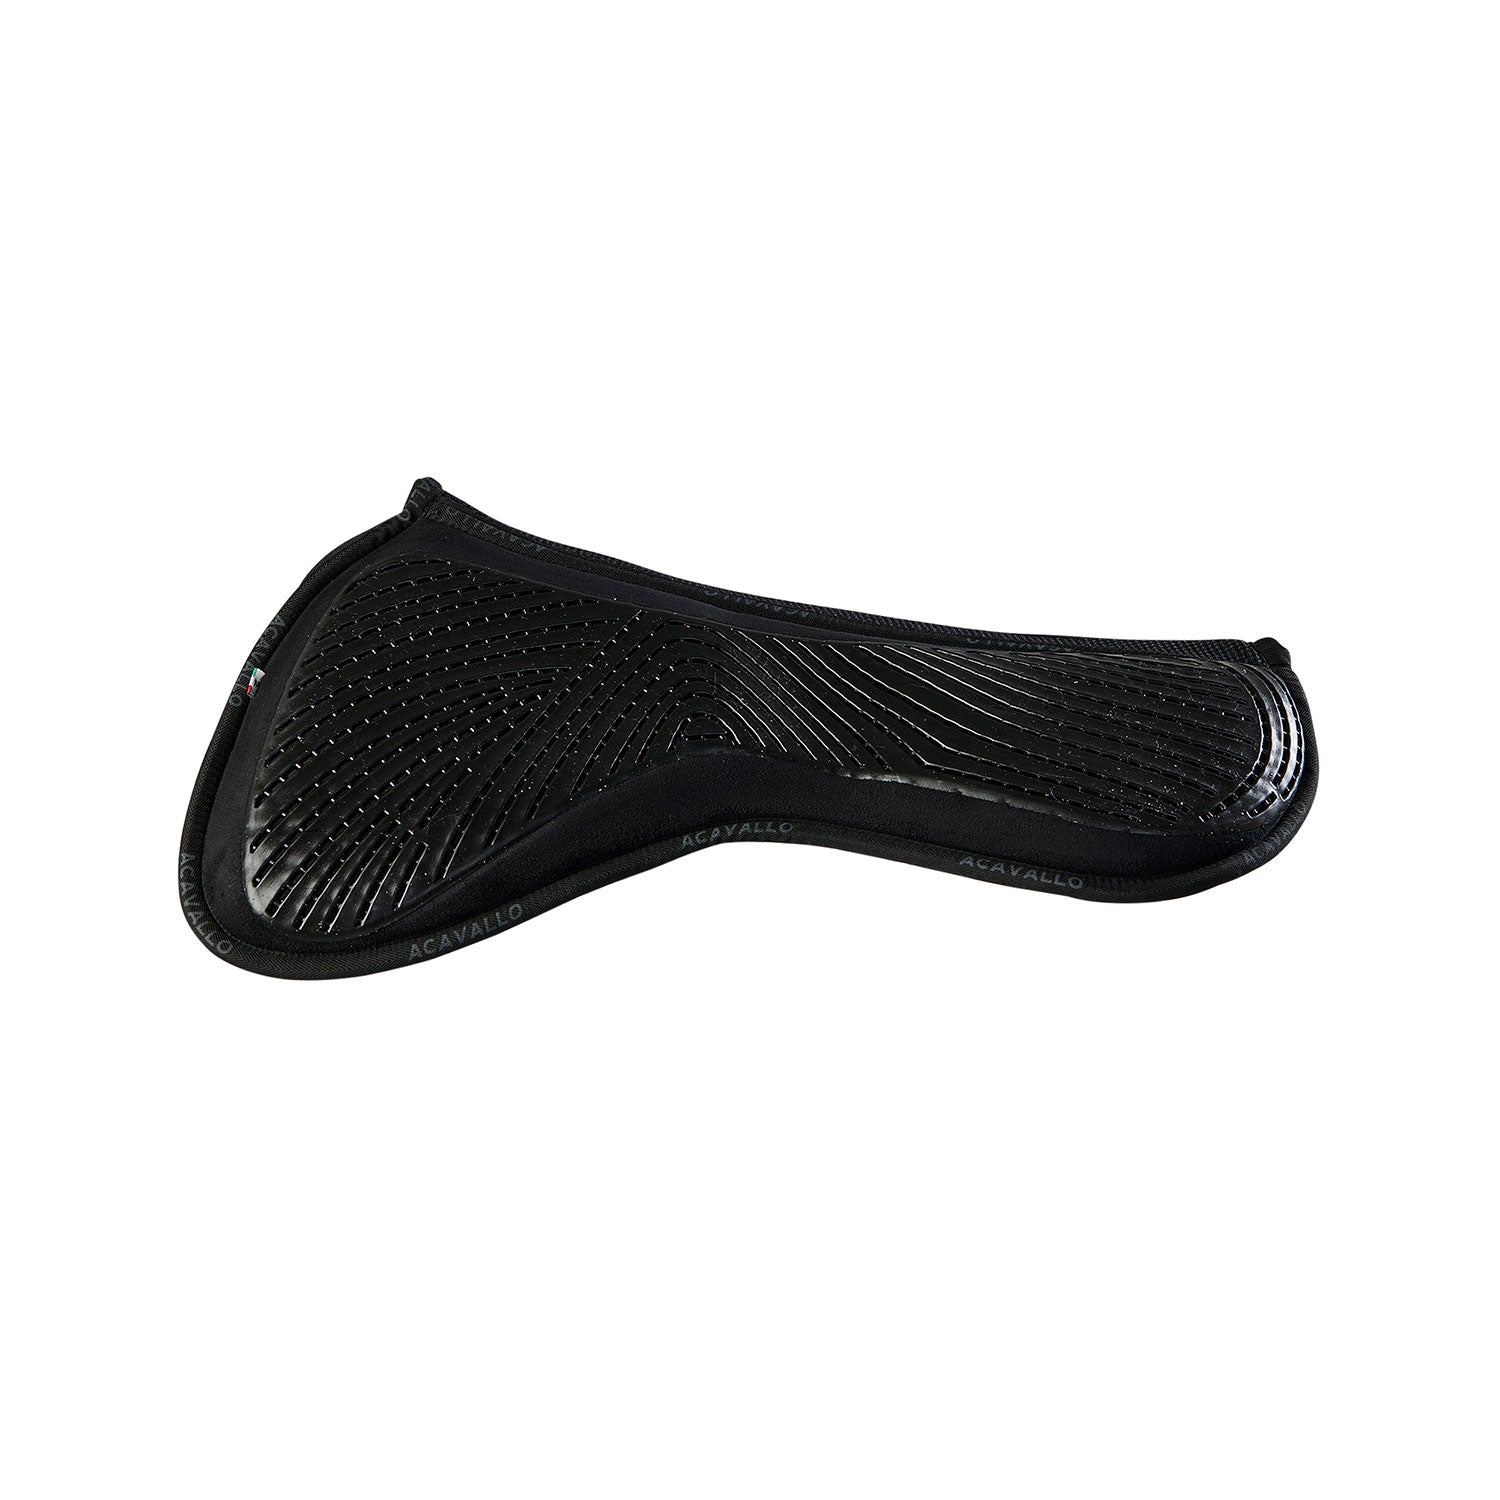 Pad Withers shaped 3D spine jumping pad gel classic - Reitstiefel Kandel - Dein Reitshop